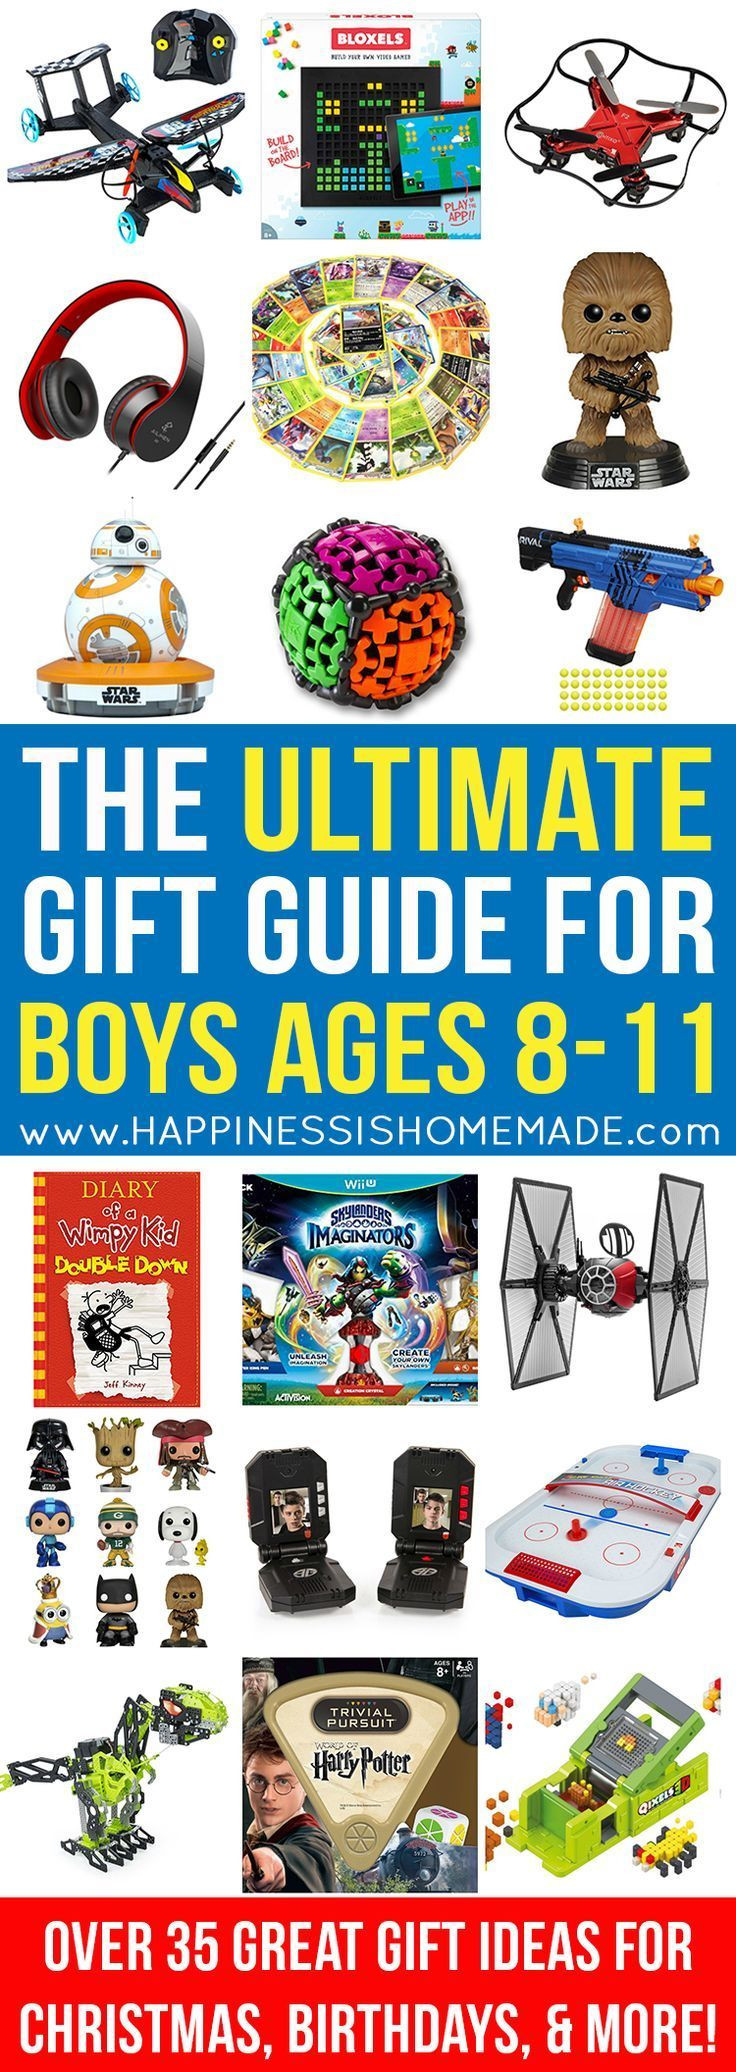 Birthday Gift Ideas For 11 Year Old Boy
 The Best Gift Ideas for Boys Ages 8 11 Looking for t